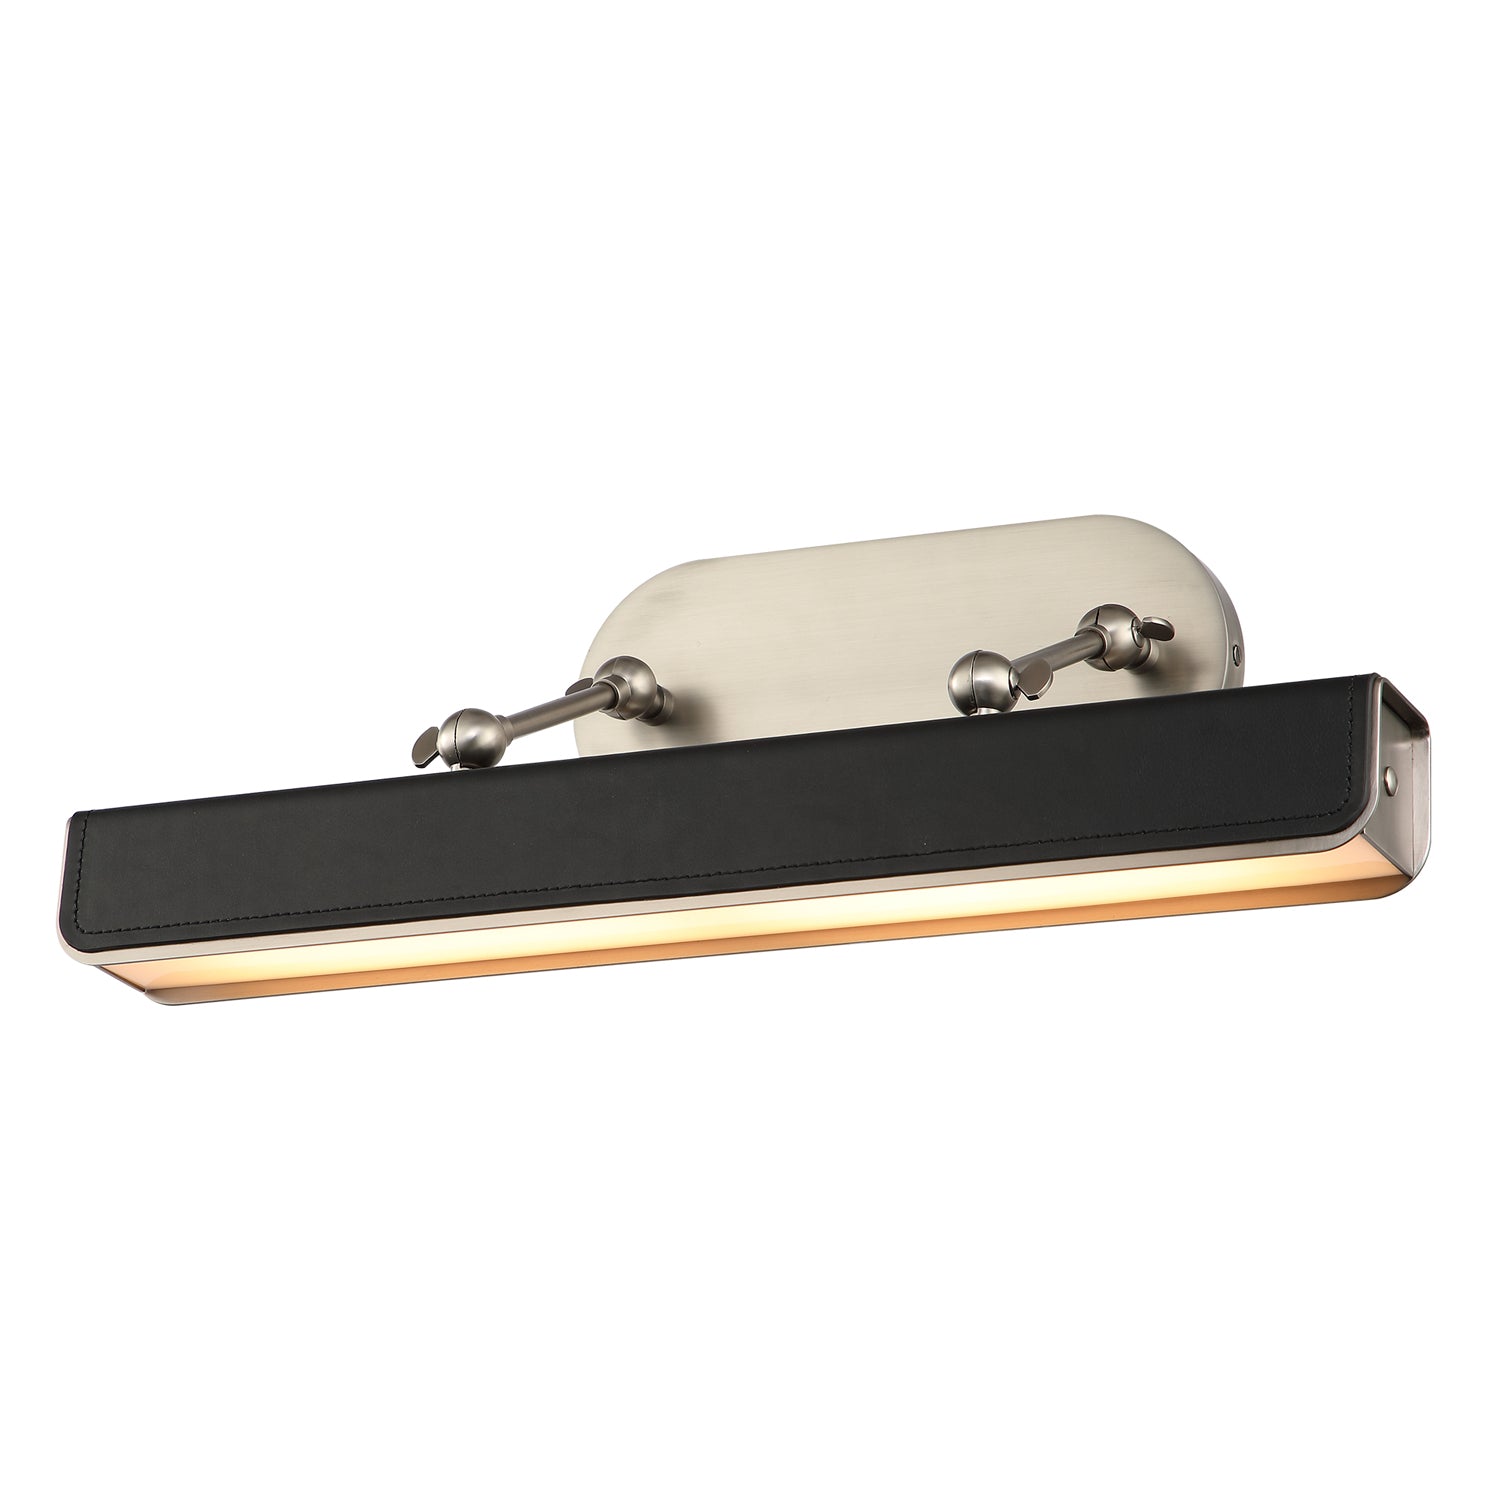 Alora Canada - LED Wall Sconce - Valise Picture - Aged Nickel- Union Lighting Luminaires Decor